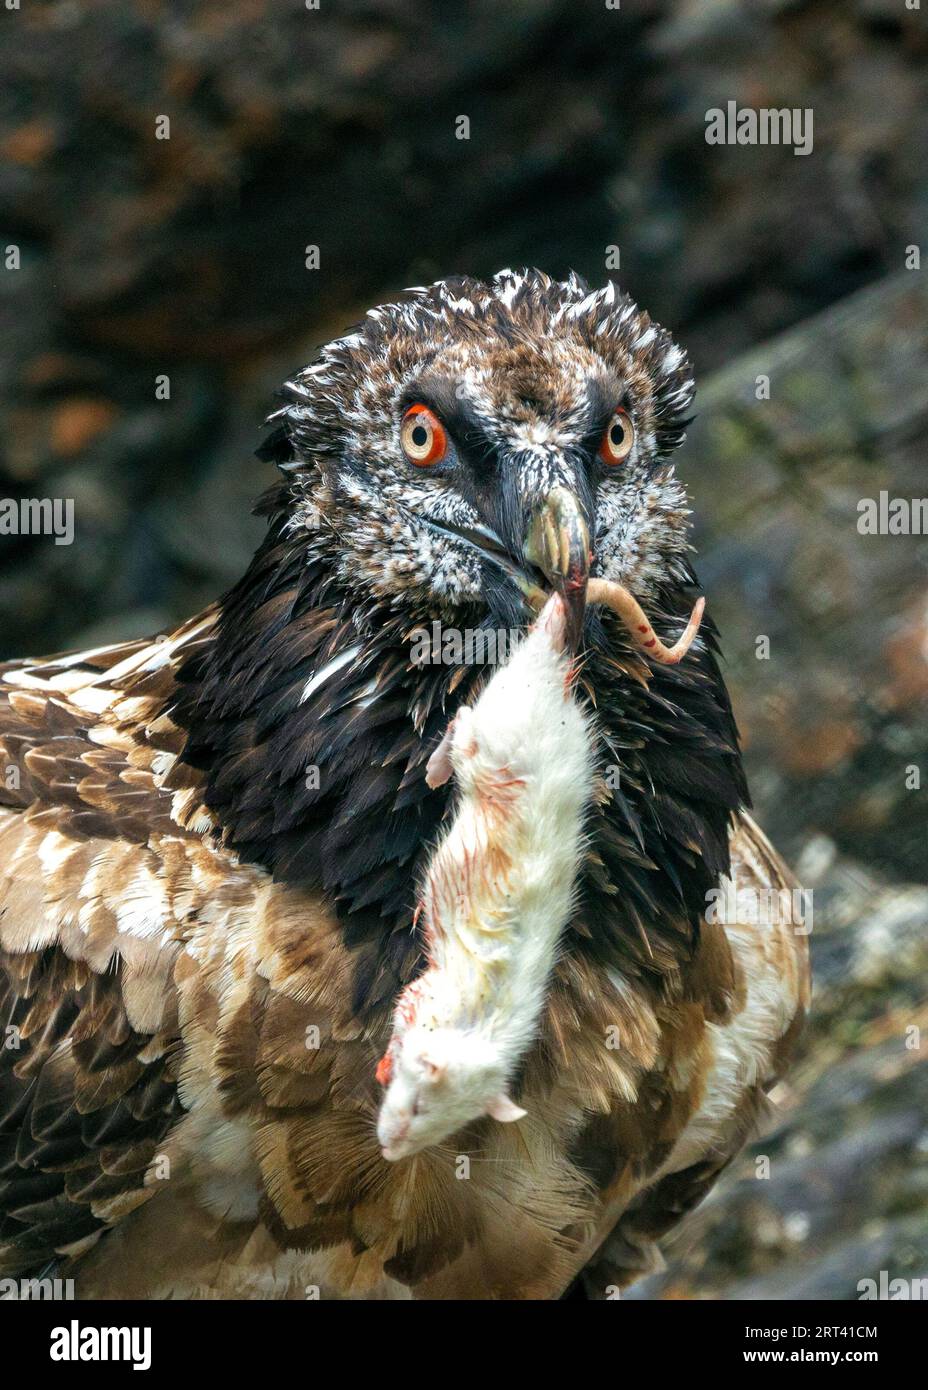 Rare moment captured: Bearded Vulture, Gypaetus barbatus, dining on a mouse in Iran's rugged terrain. A testament to nature's balance. Stock Photo